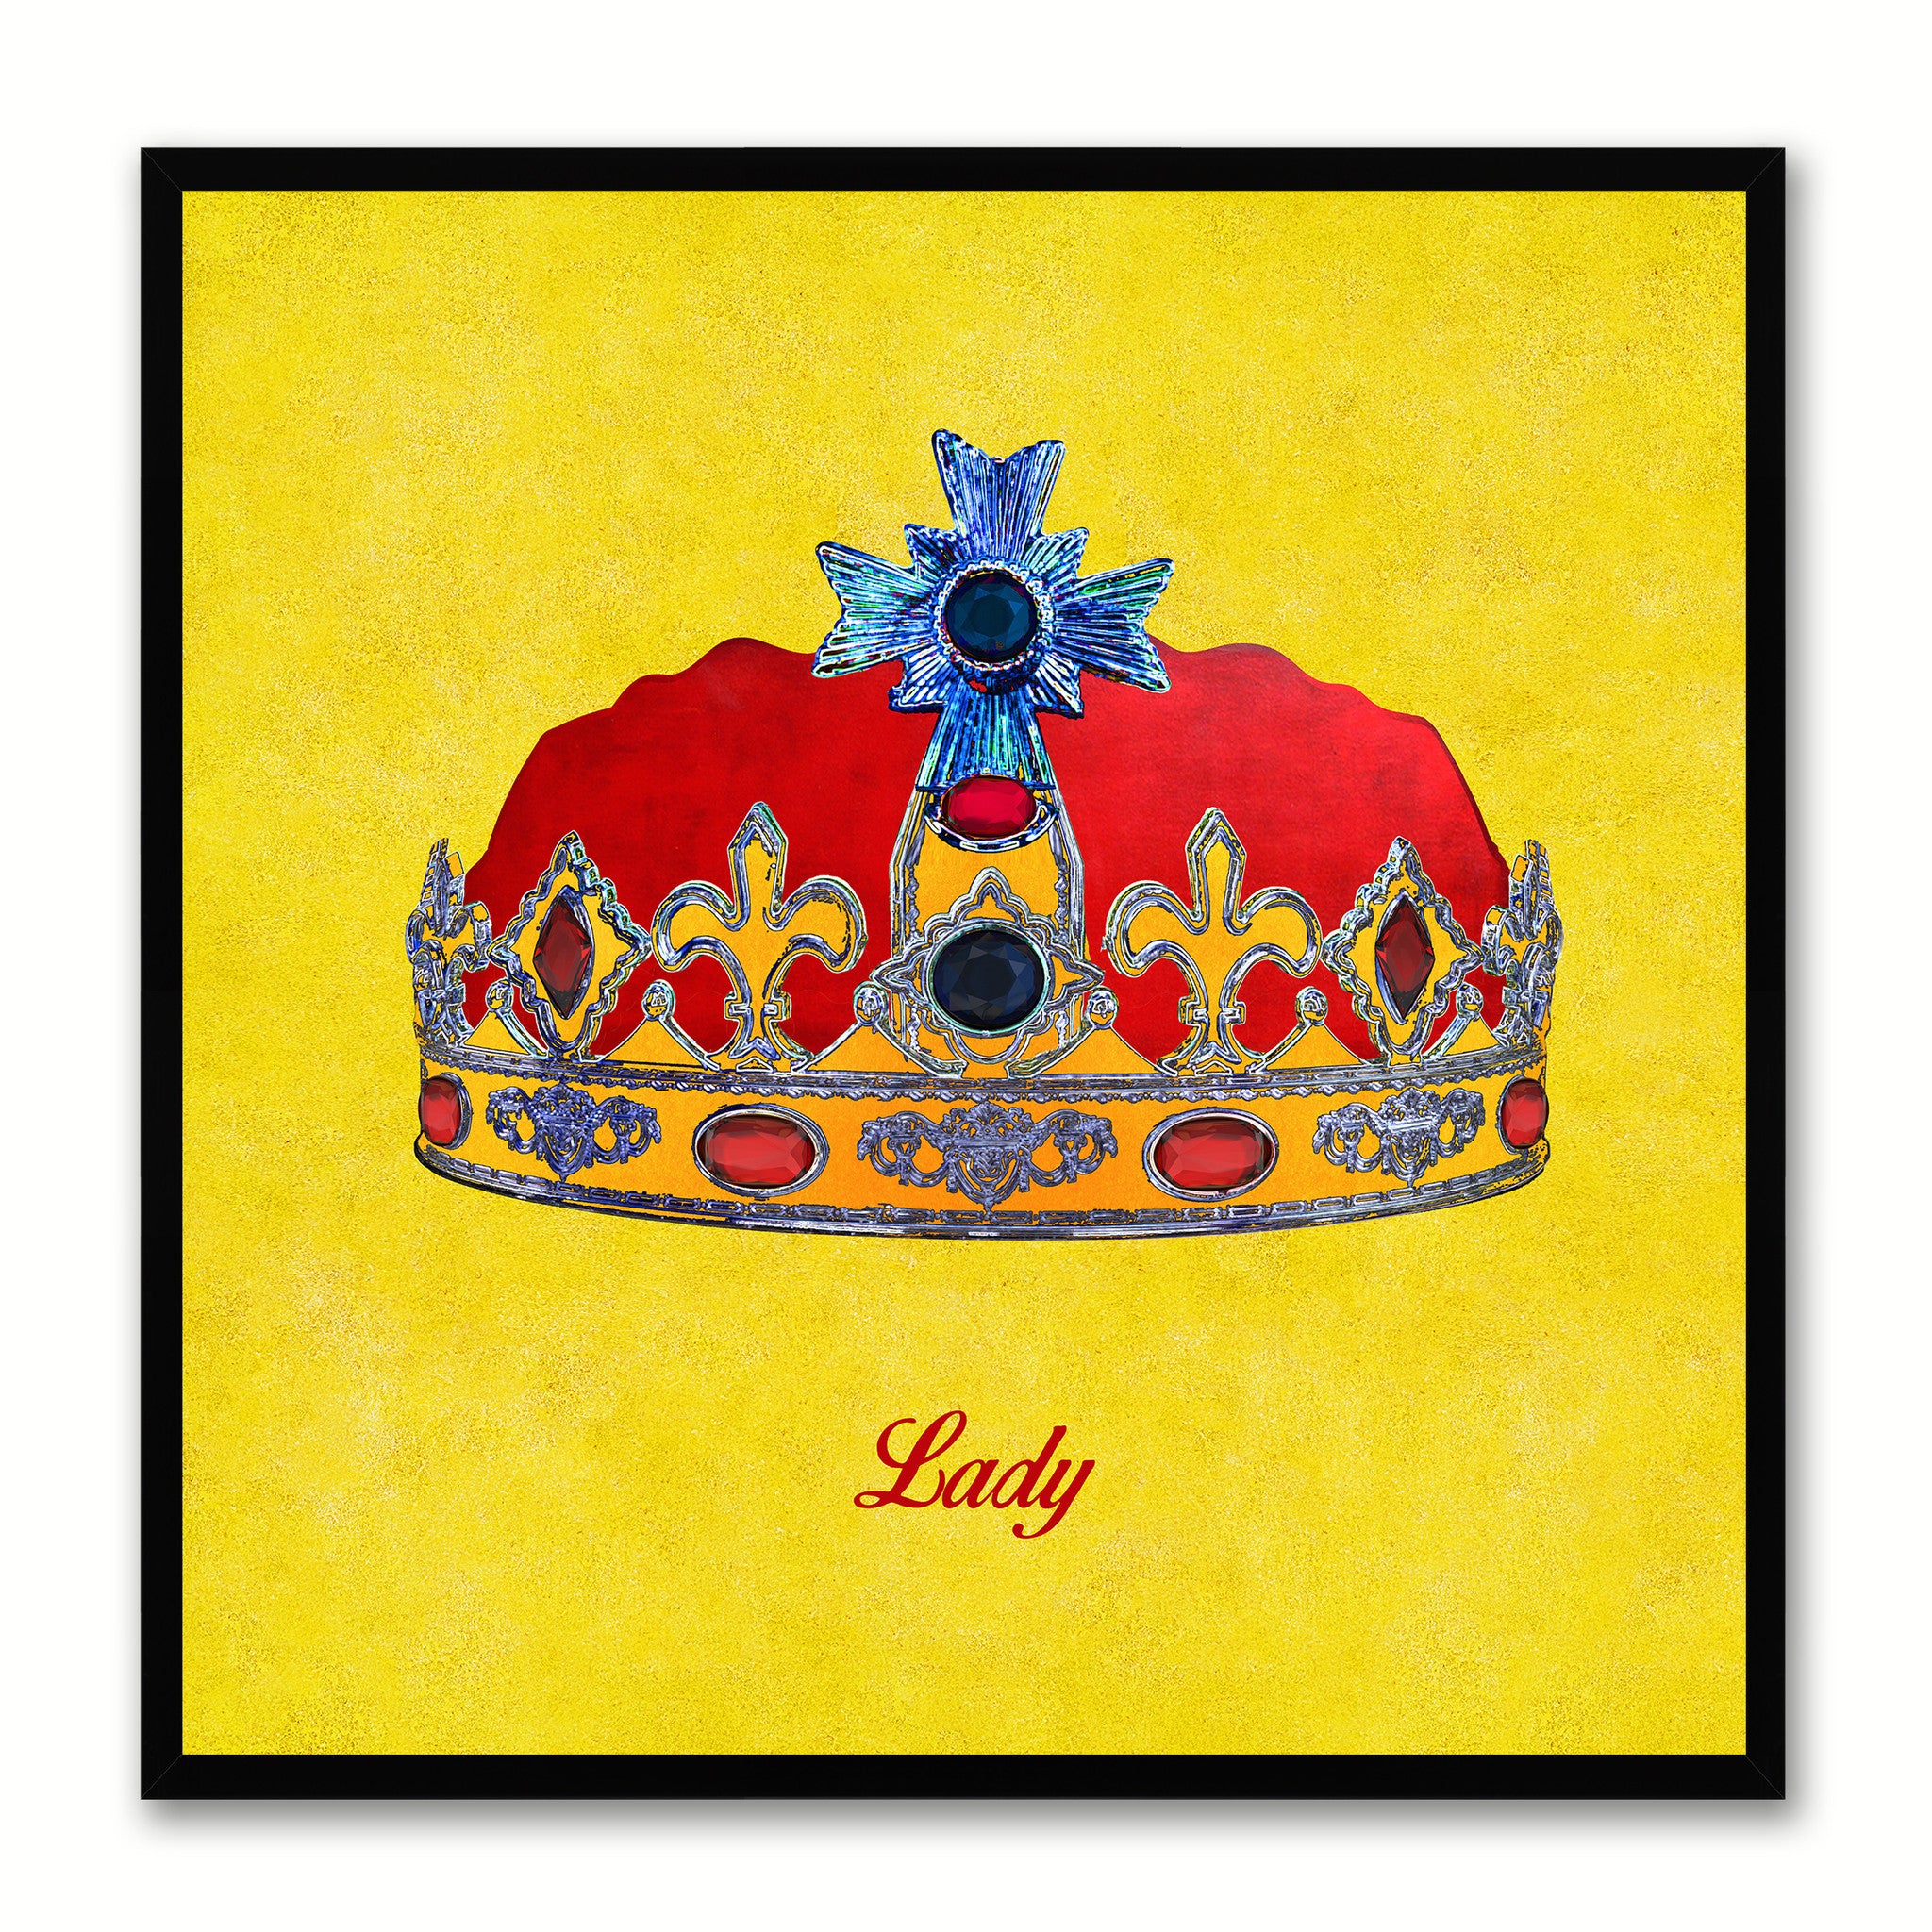 Lady Yellow Canvas Print Black Frame Kids Bedroom Wall Home Décor